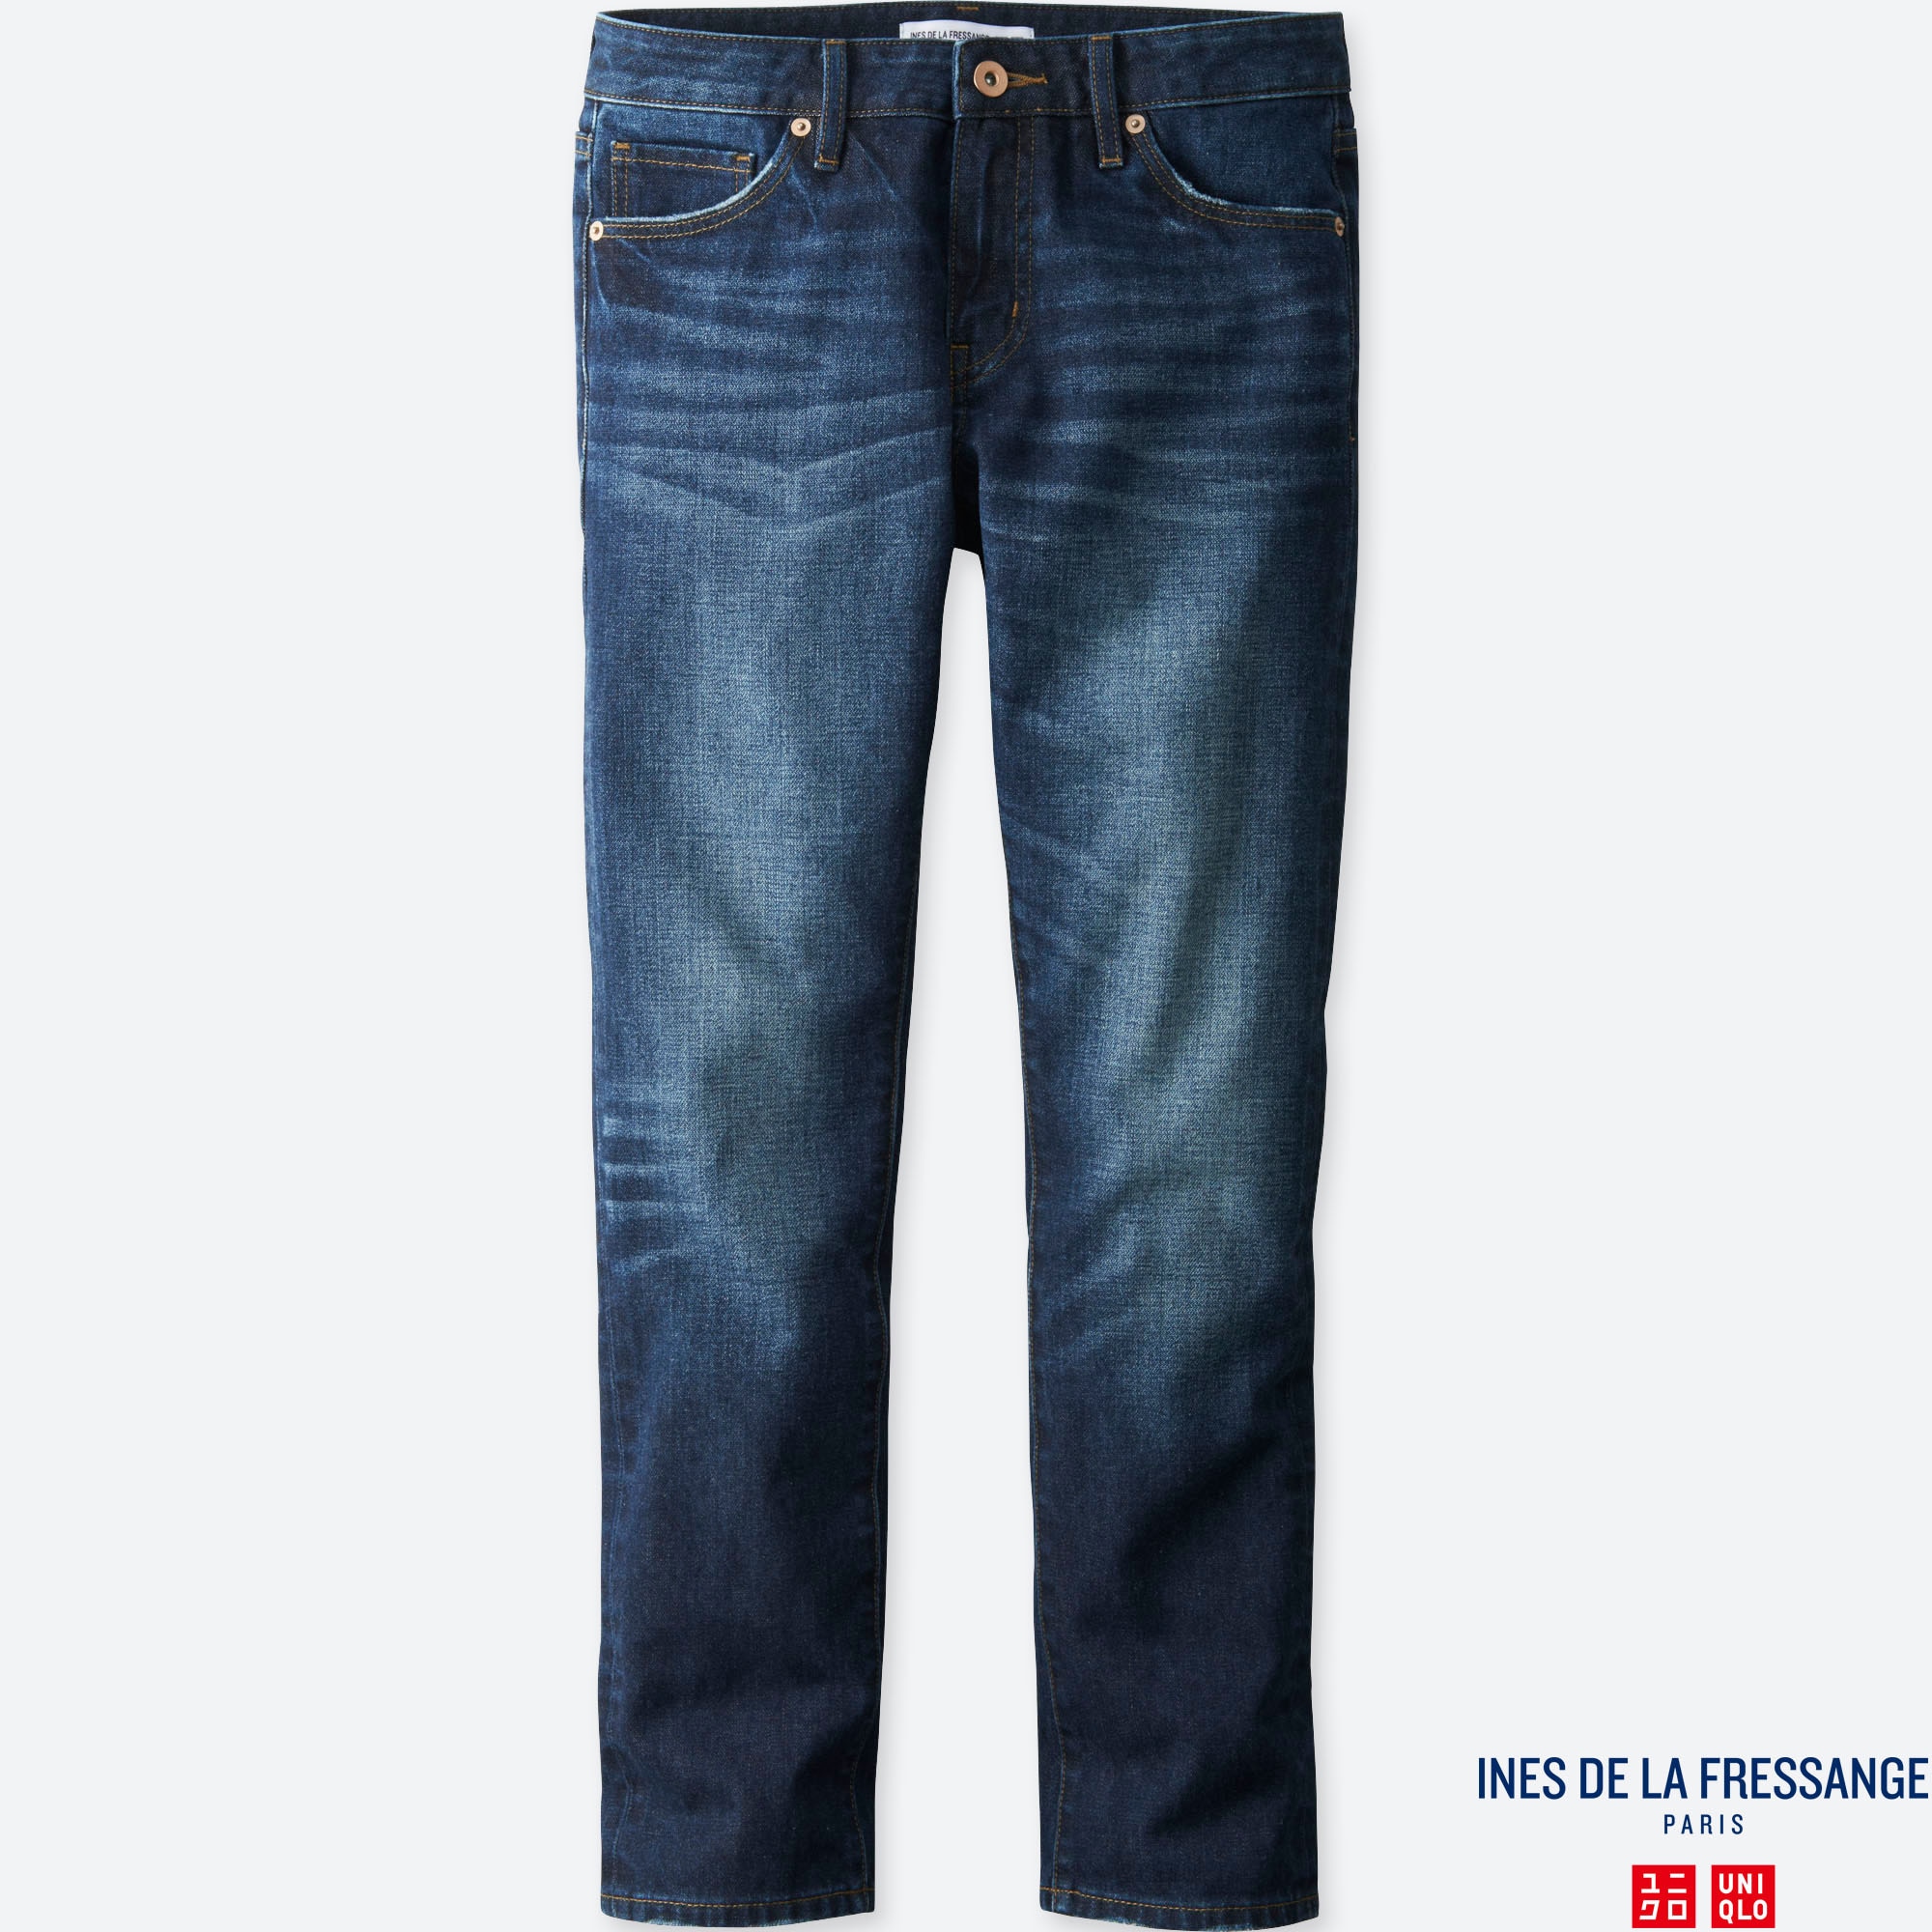 ankle length slim fit jeans